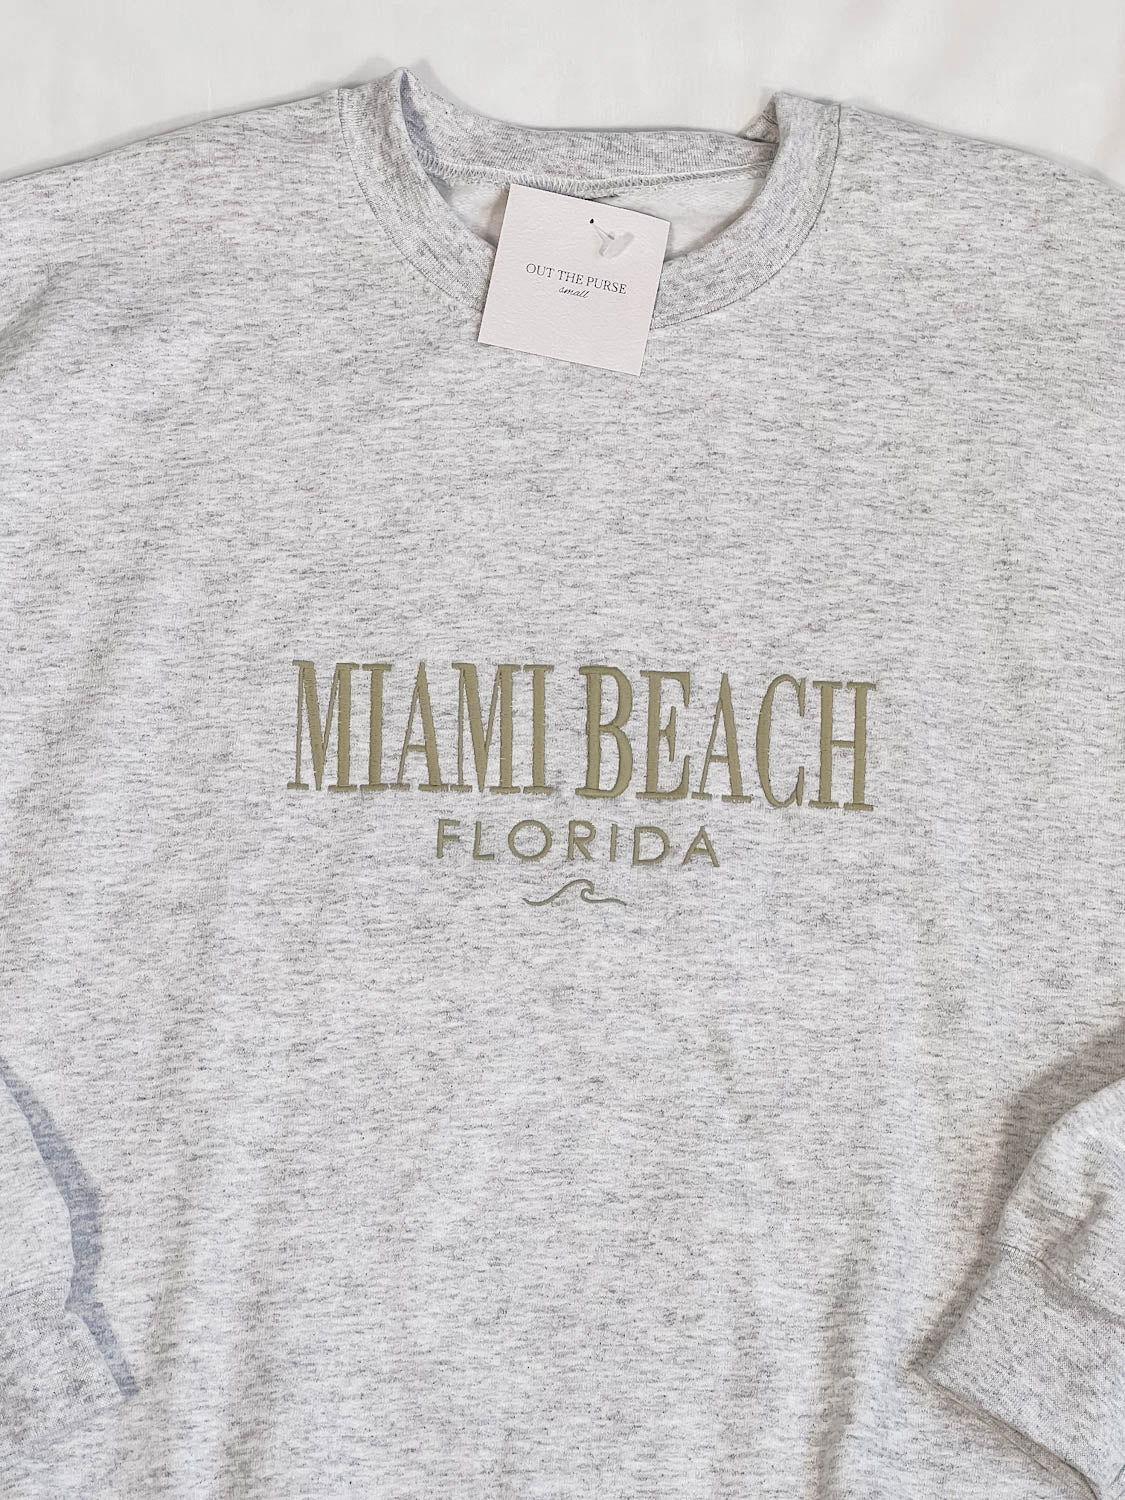 ONE OFF - Miami Beach Ash Sweater S Out The Purse